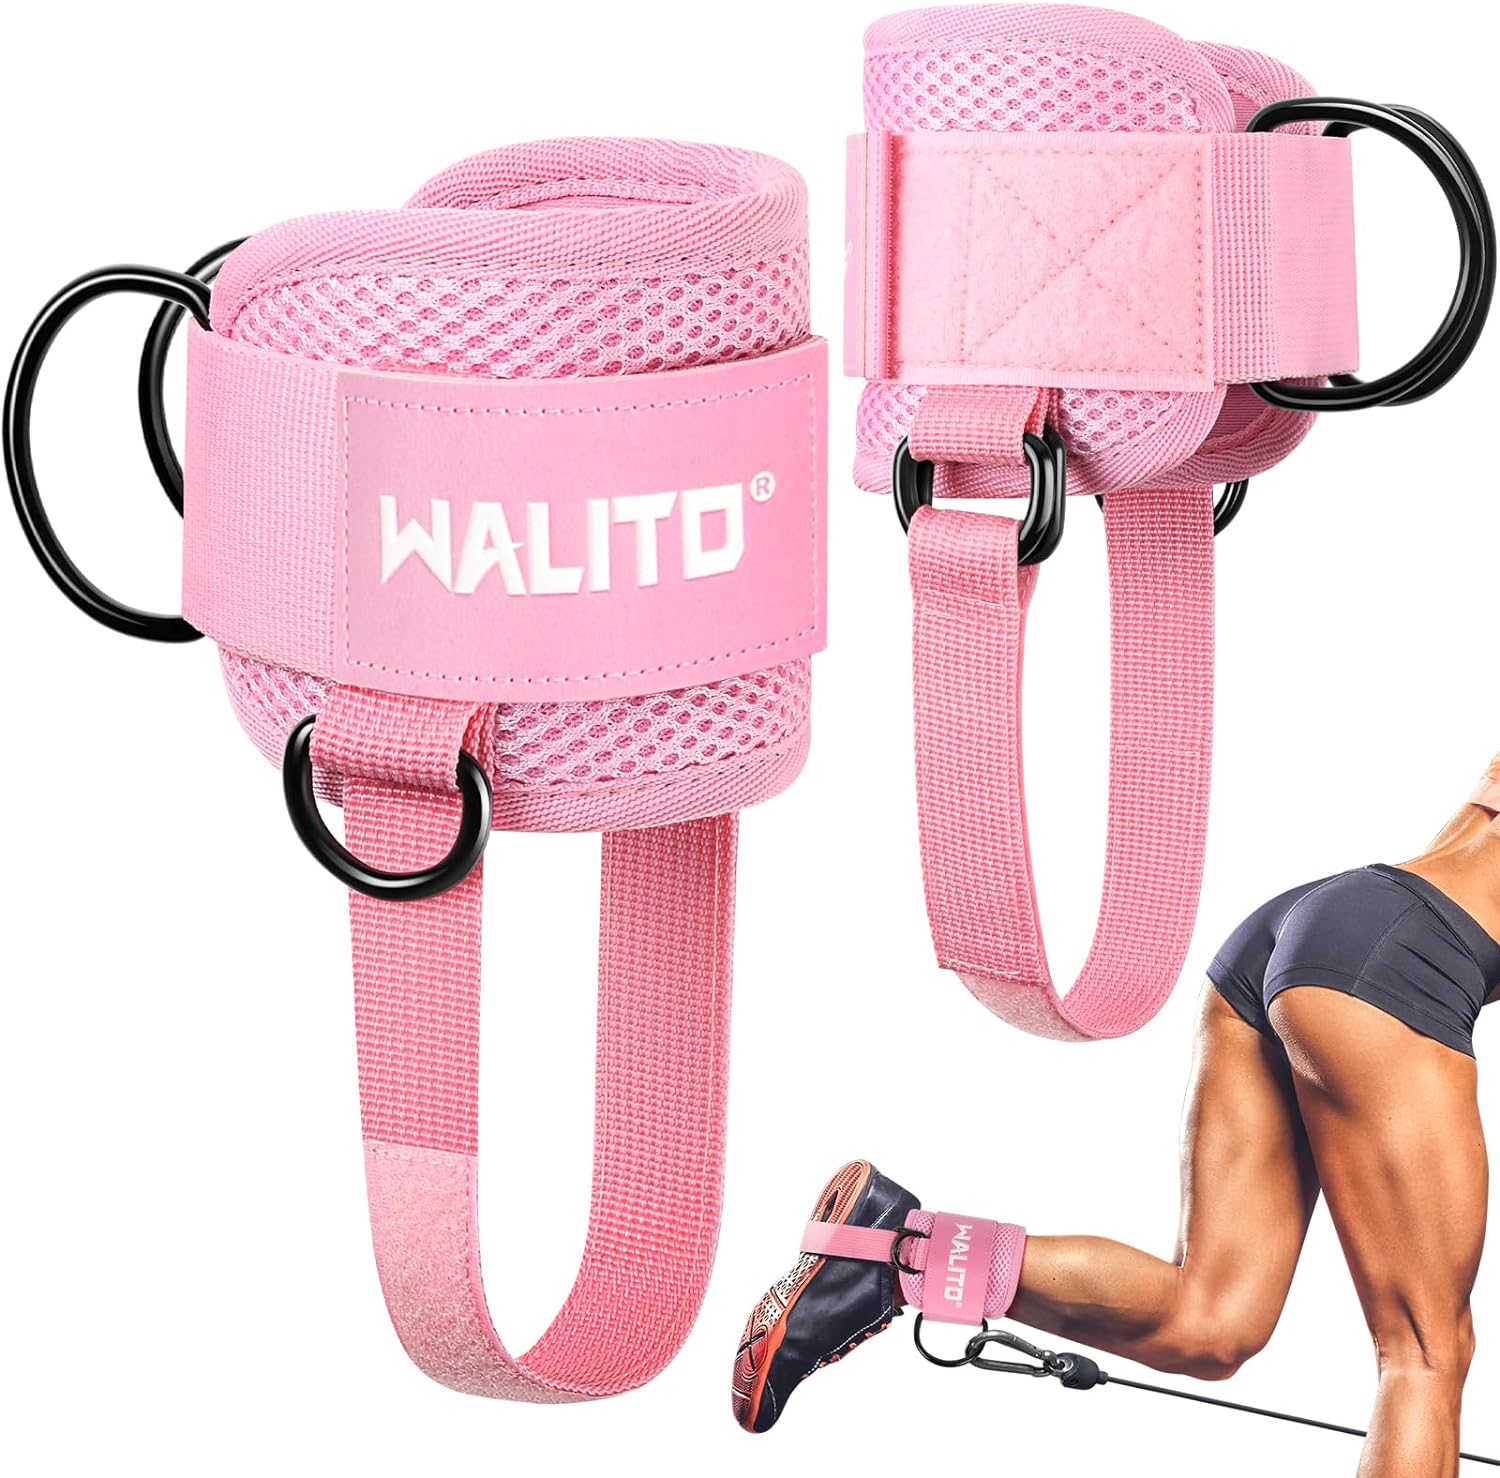 walito gym ankle straps review